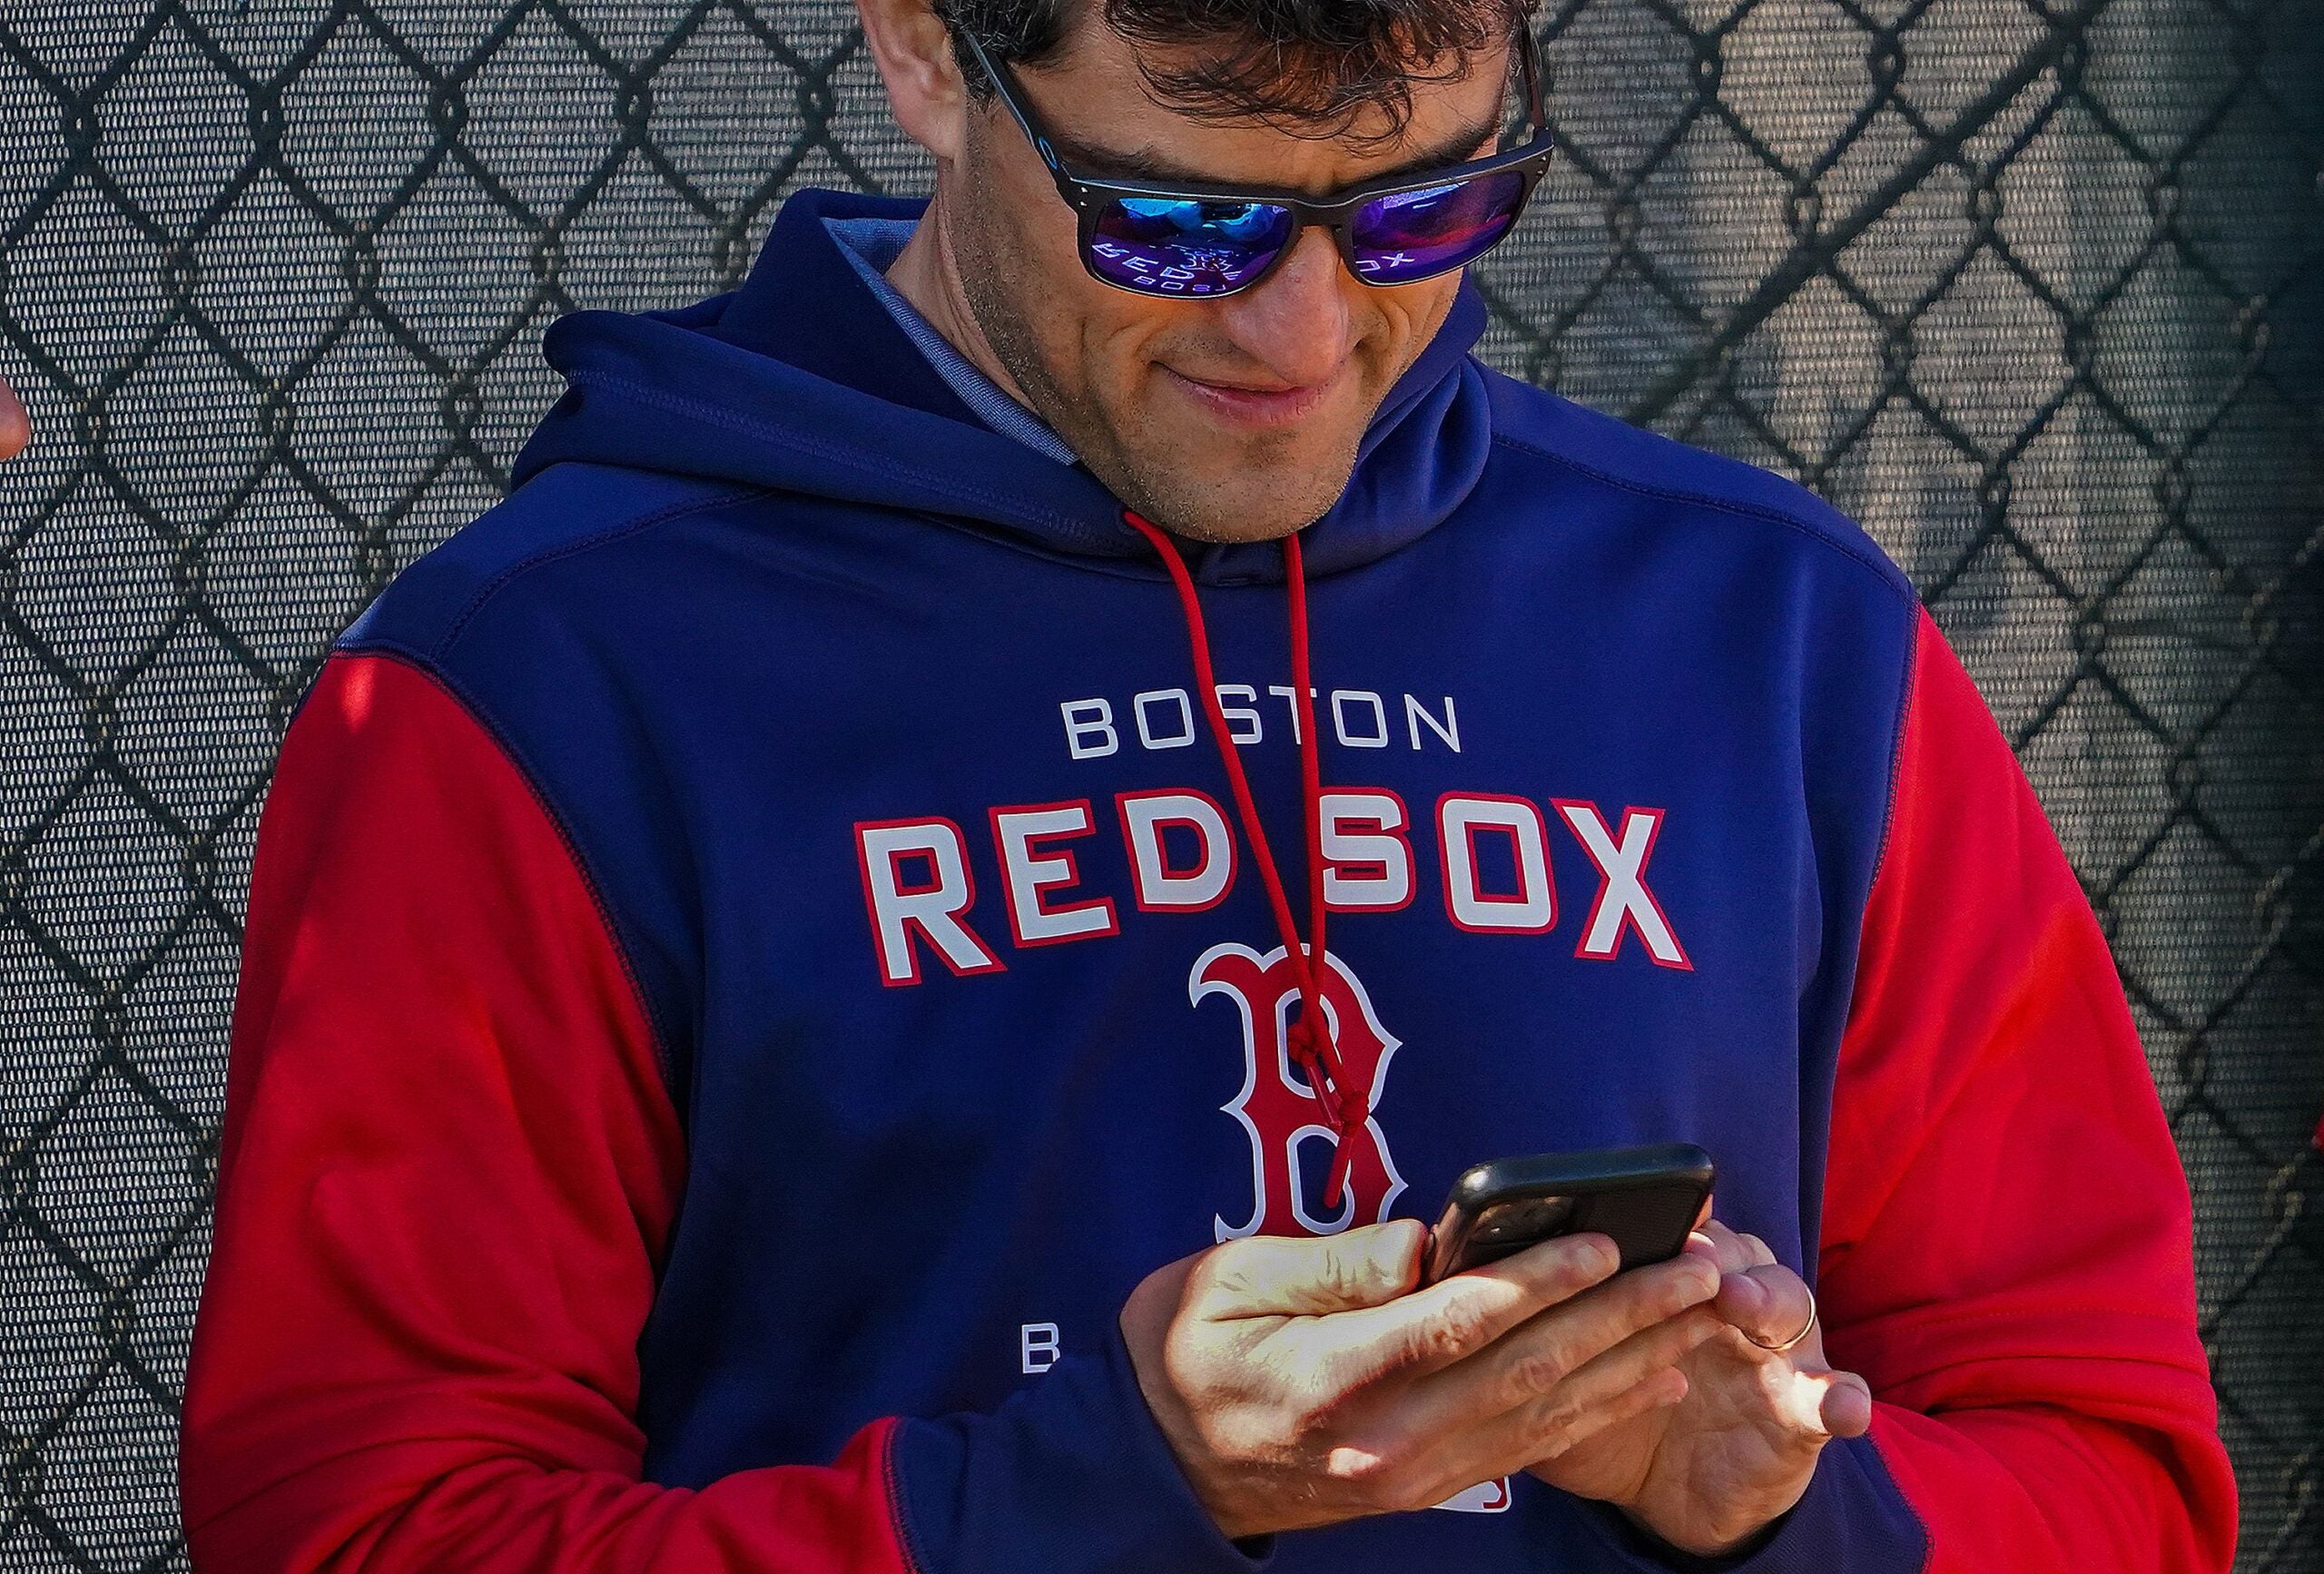 Chaim Bloom's search for players (and room on his 40-man roster) has been "relentless" since the lockout ended, according to manager Alex Cora.